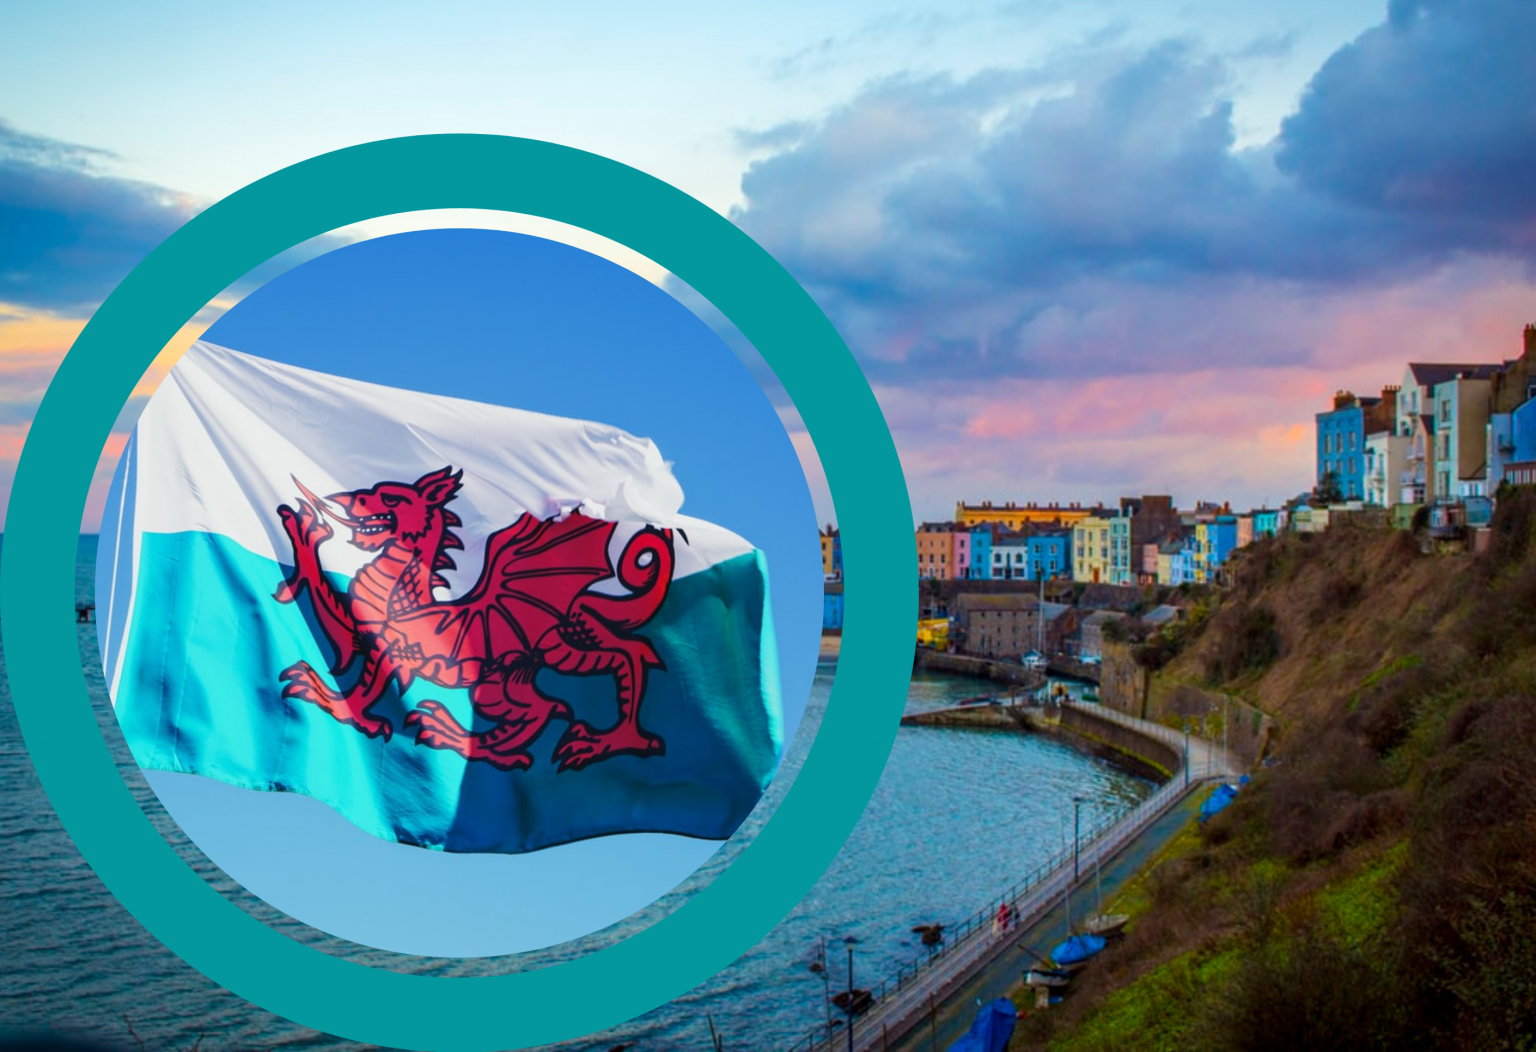 NEWS | New COVID-19 measures come into force in Wales this morning – FULL DETAILS